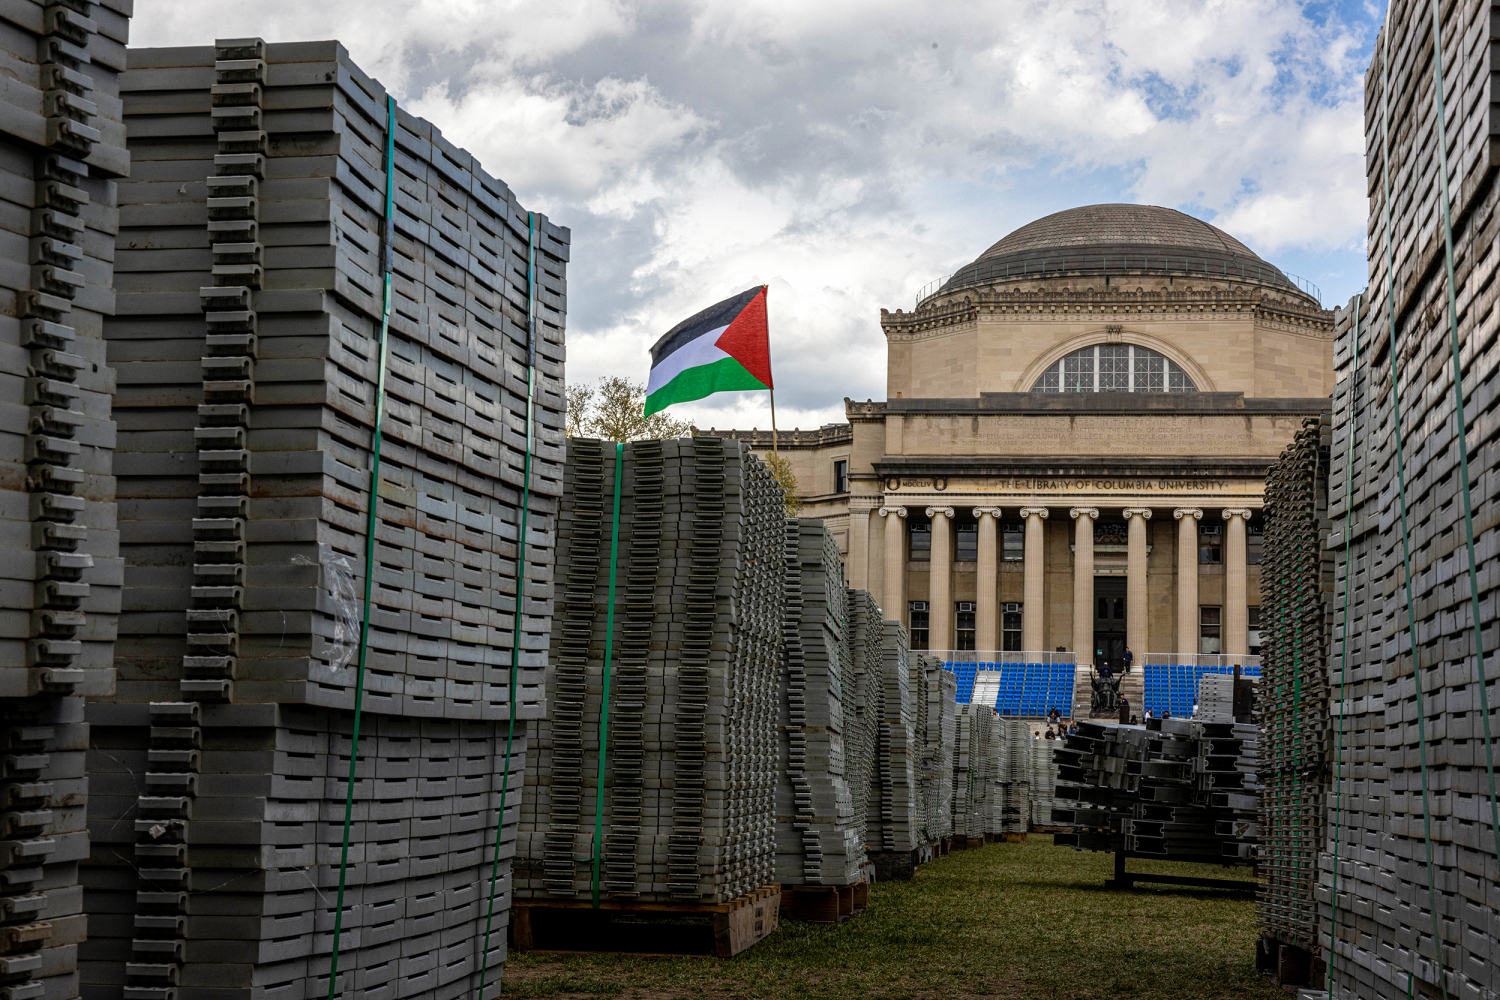 After weeks of pro-Palestinian protests on campuses, colleges regroup ahead of commencement ceremonies